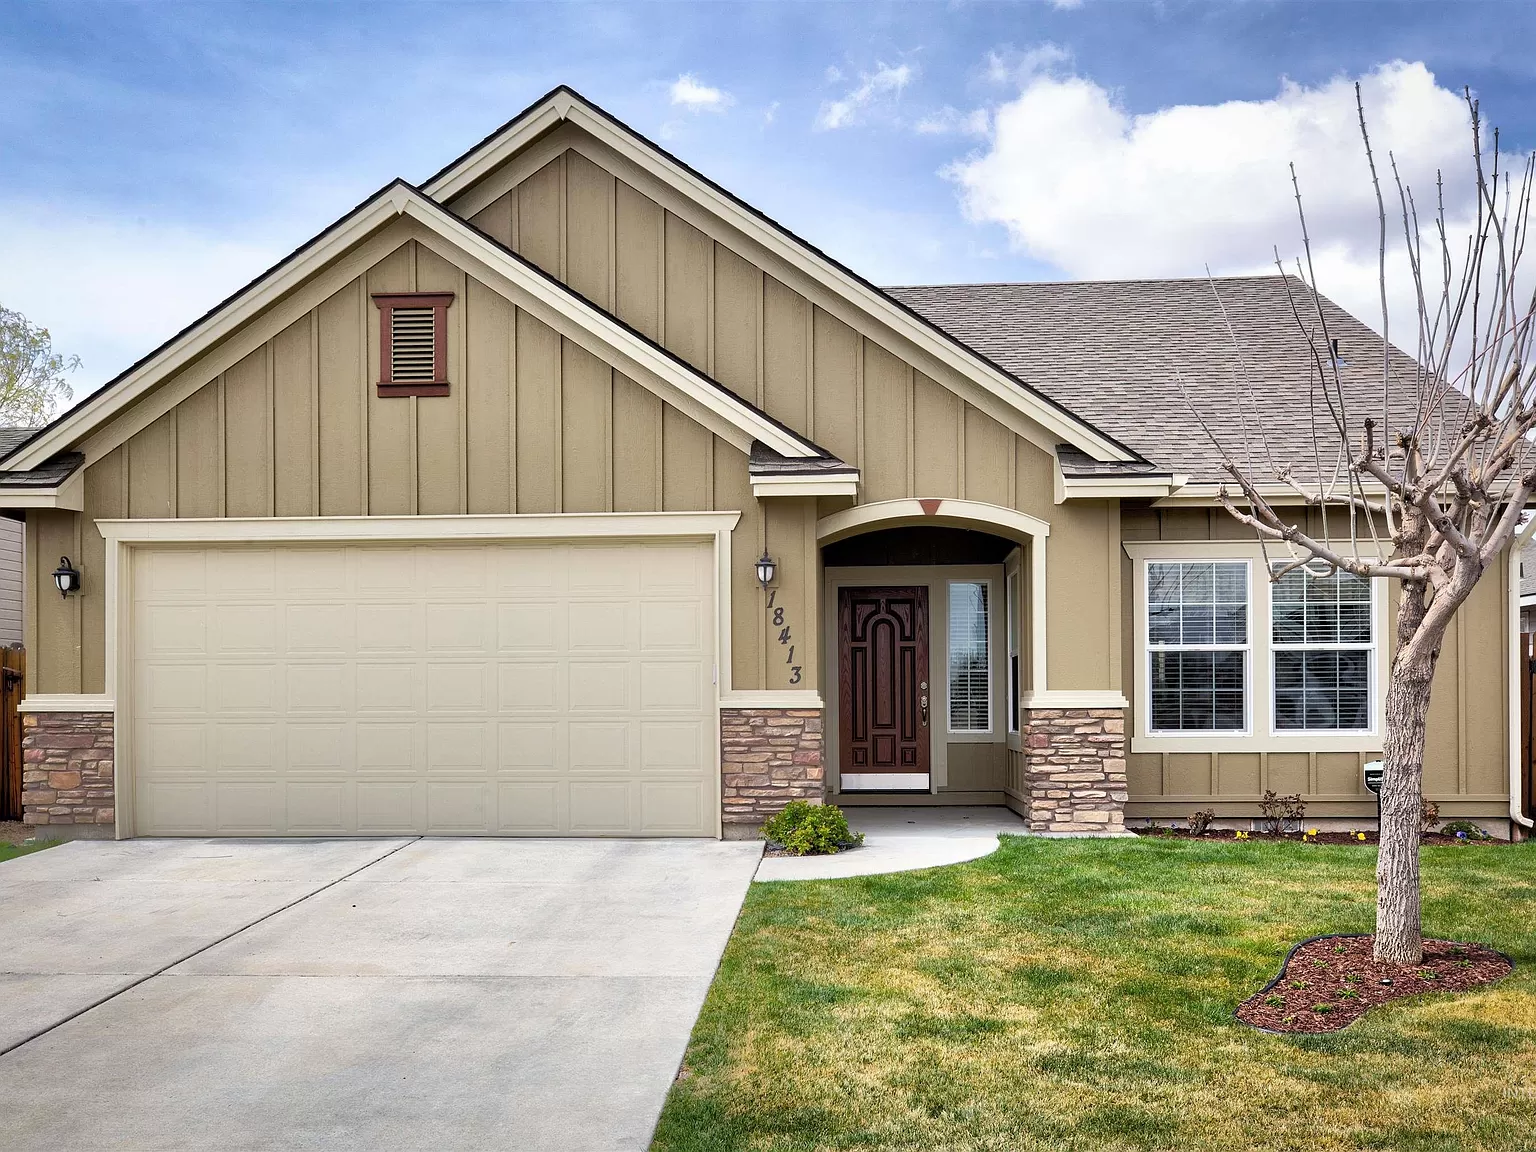 18413 Angel Wing Ave, Nampa, ID 83687 | Zillow